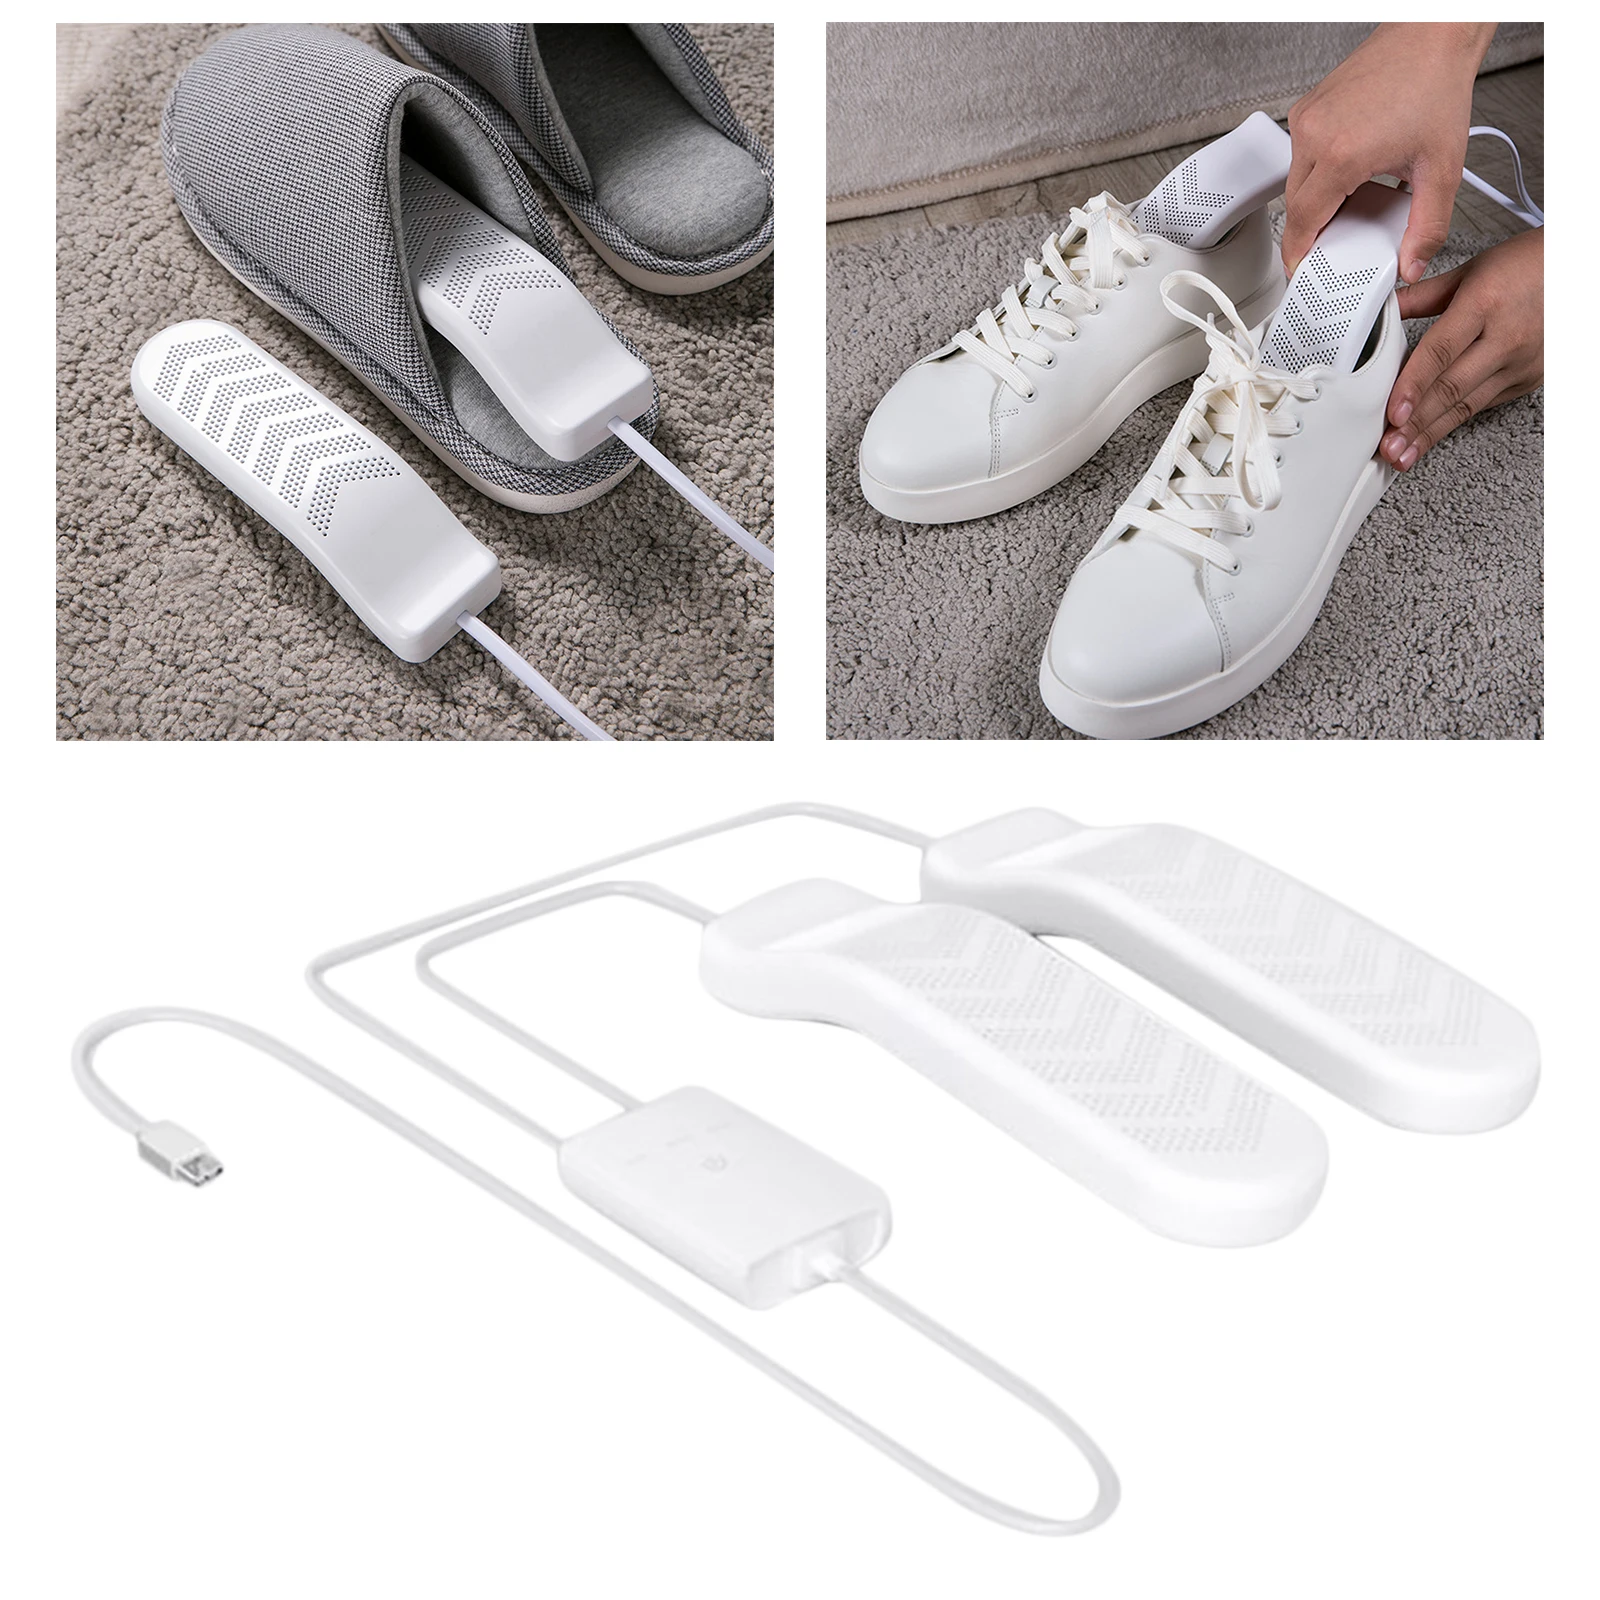 Household USB Electric Boot Dryer Shoe Dryer with Timer Deodorizate 5V White